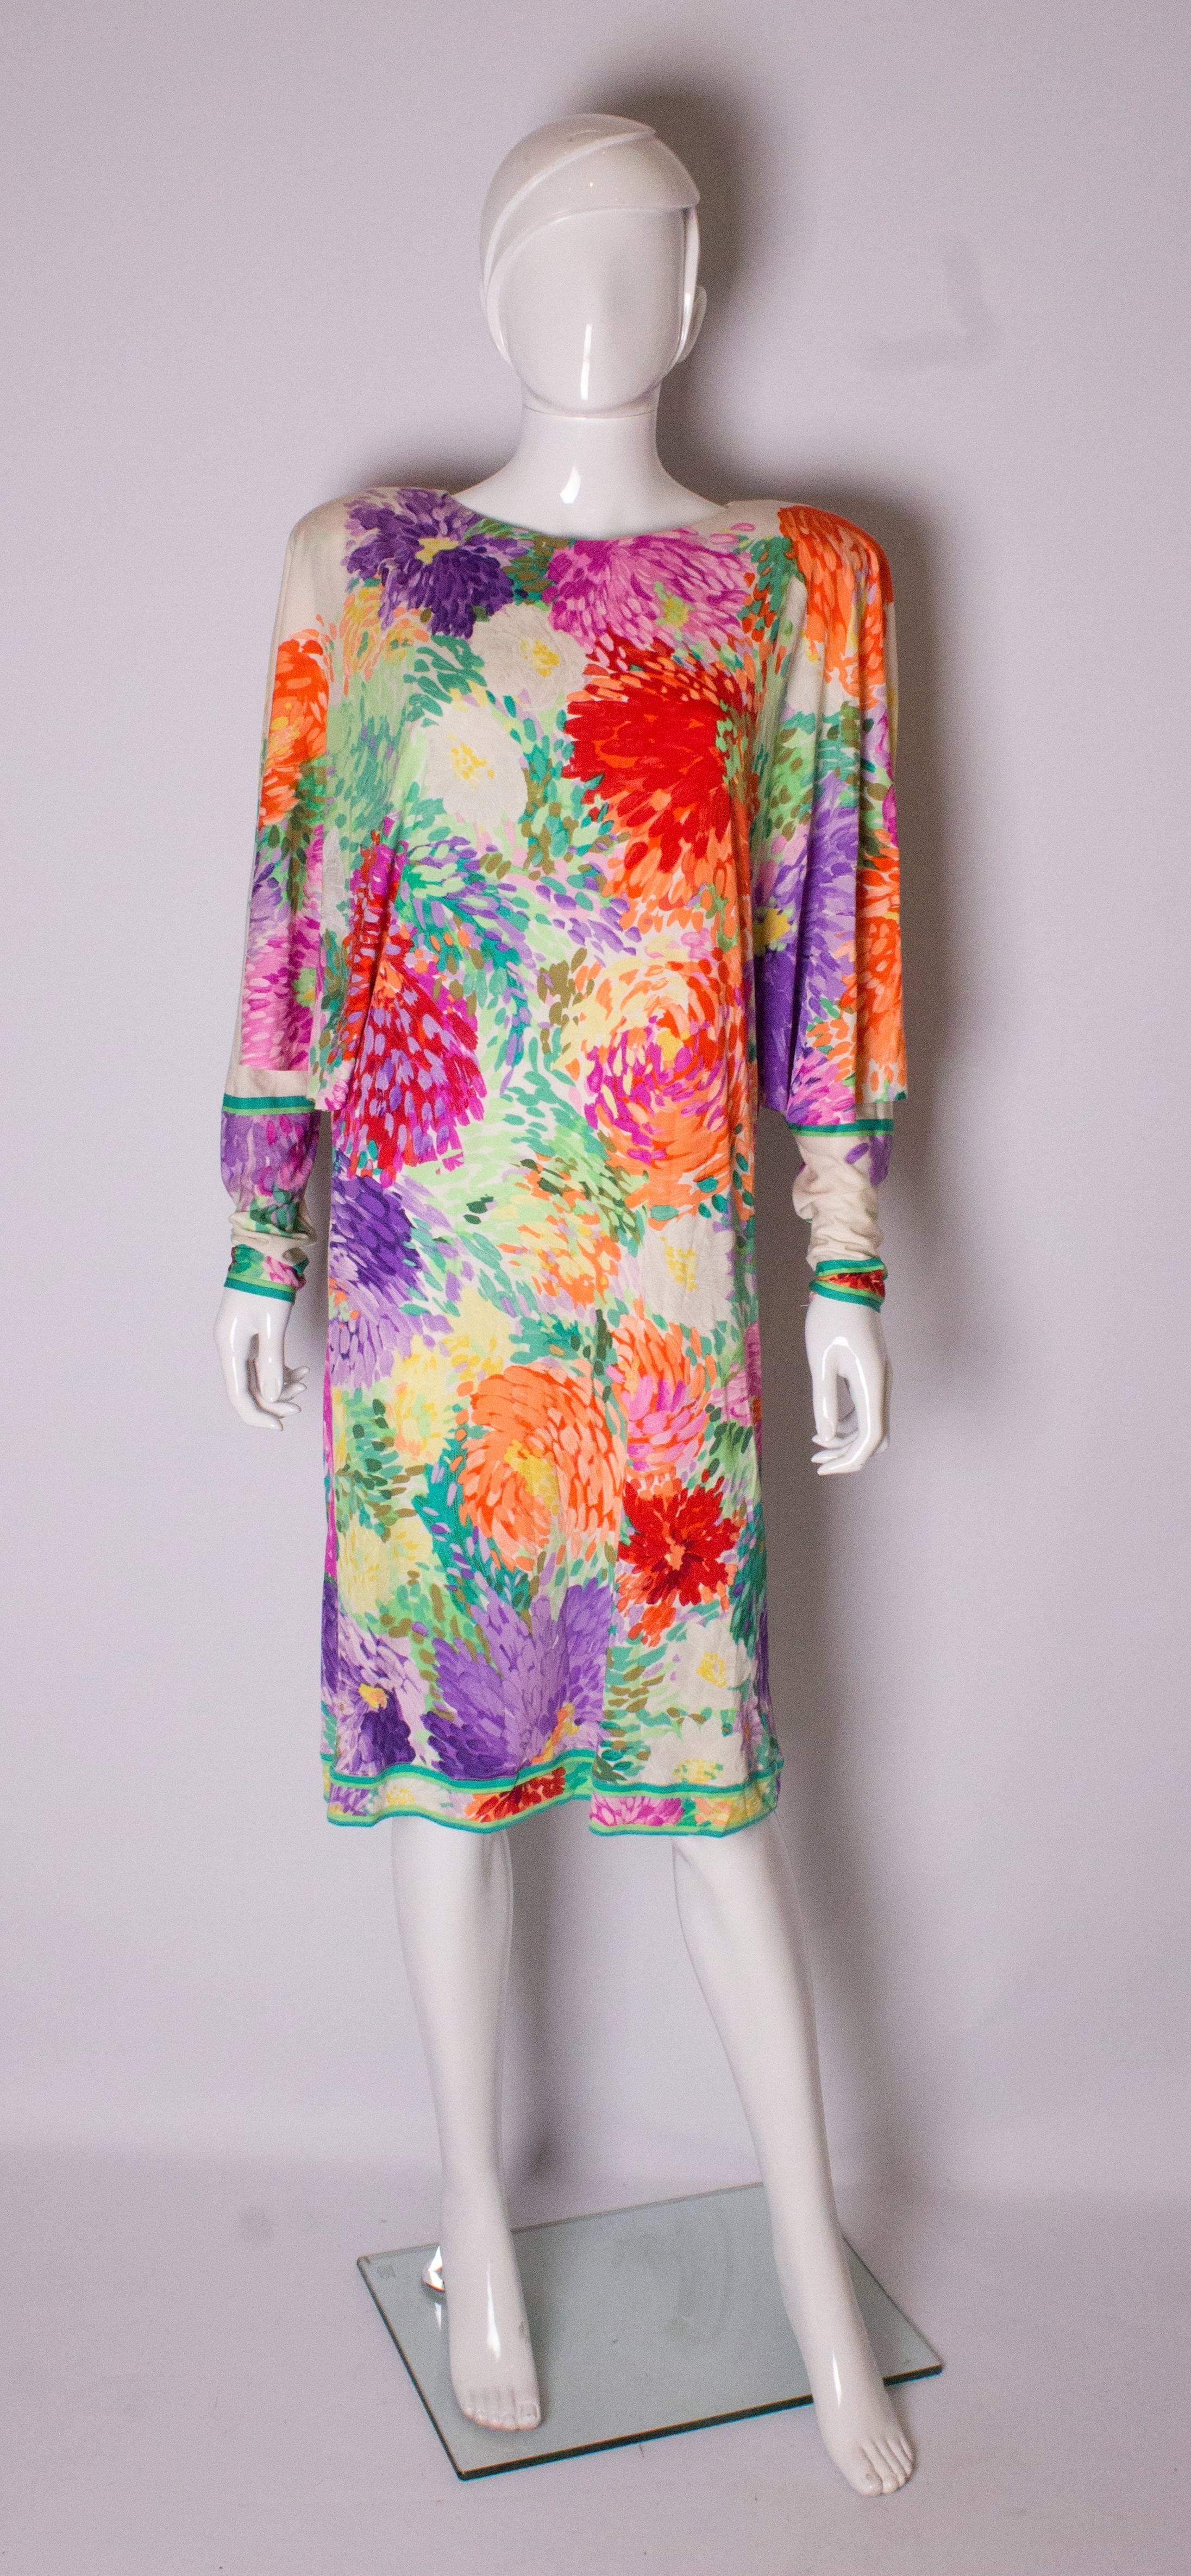 A wonderful dress by Leonard,in a typical vibrant floral print. The dress has great sleeves , a central back zip. It is open under the arm but this can be sewn up if required.